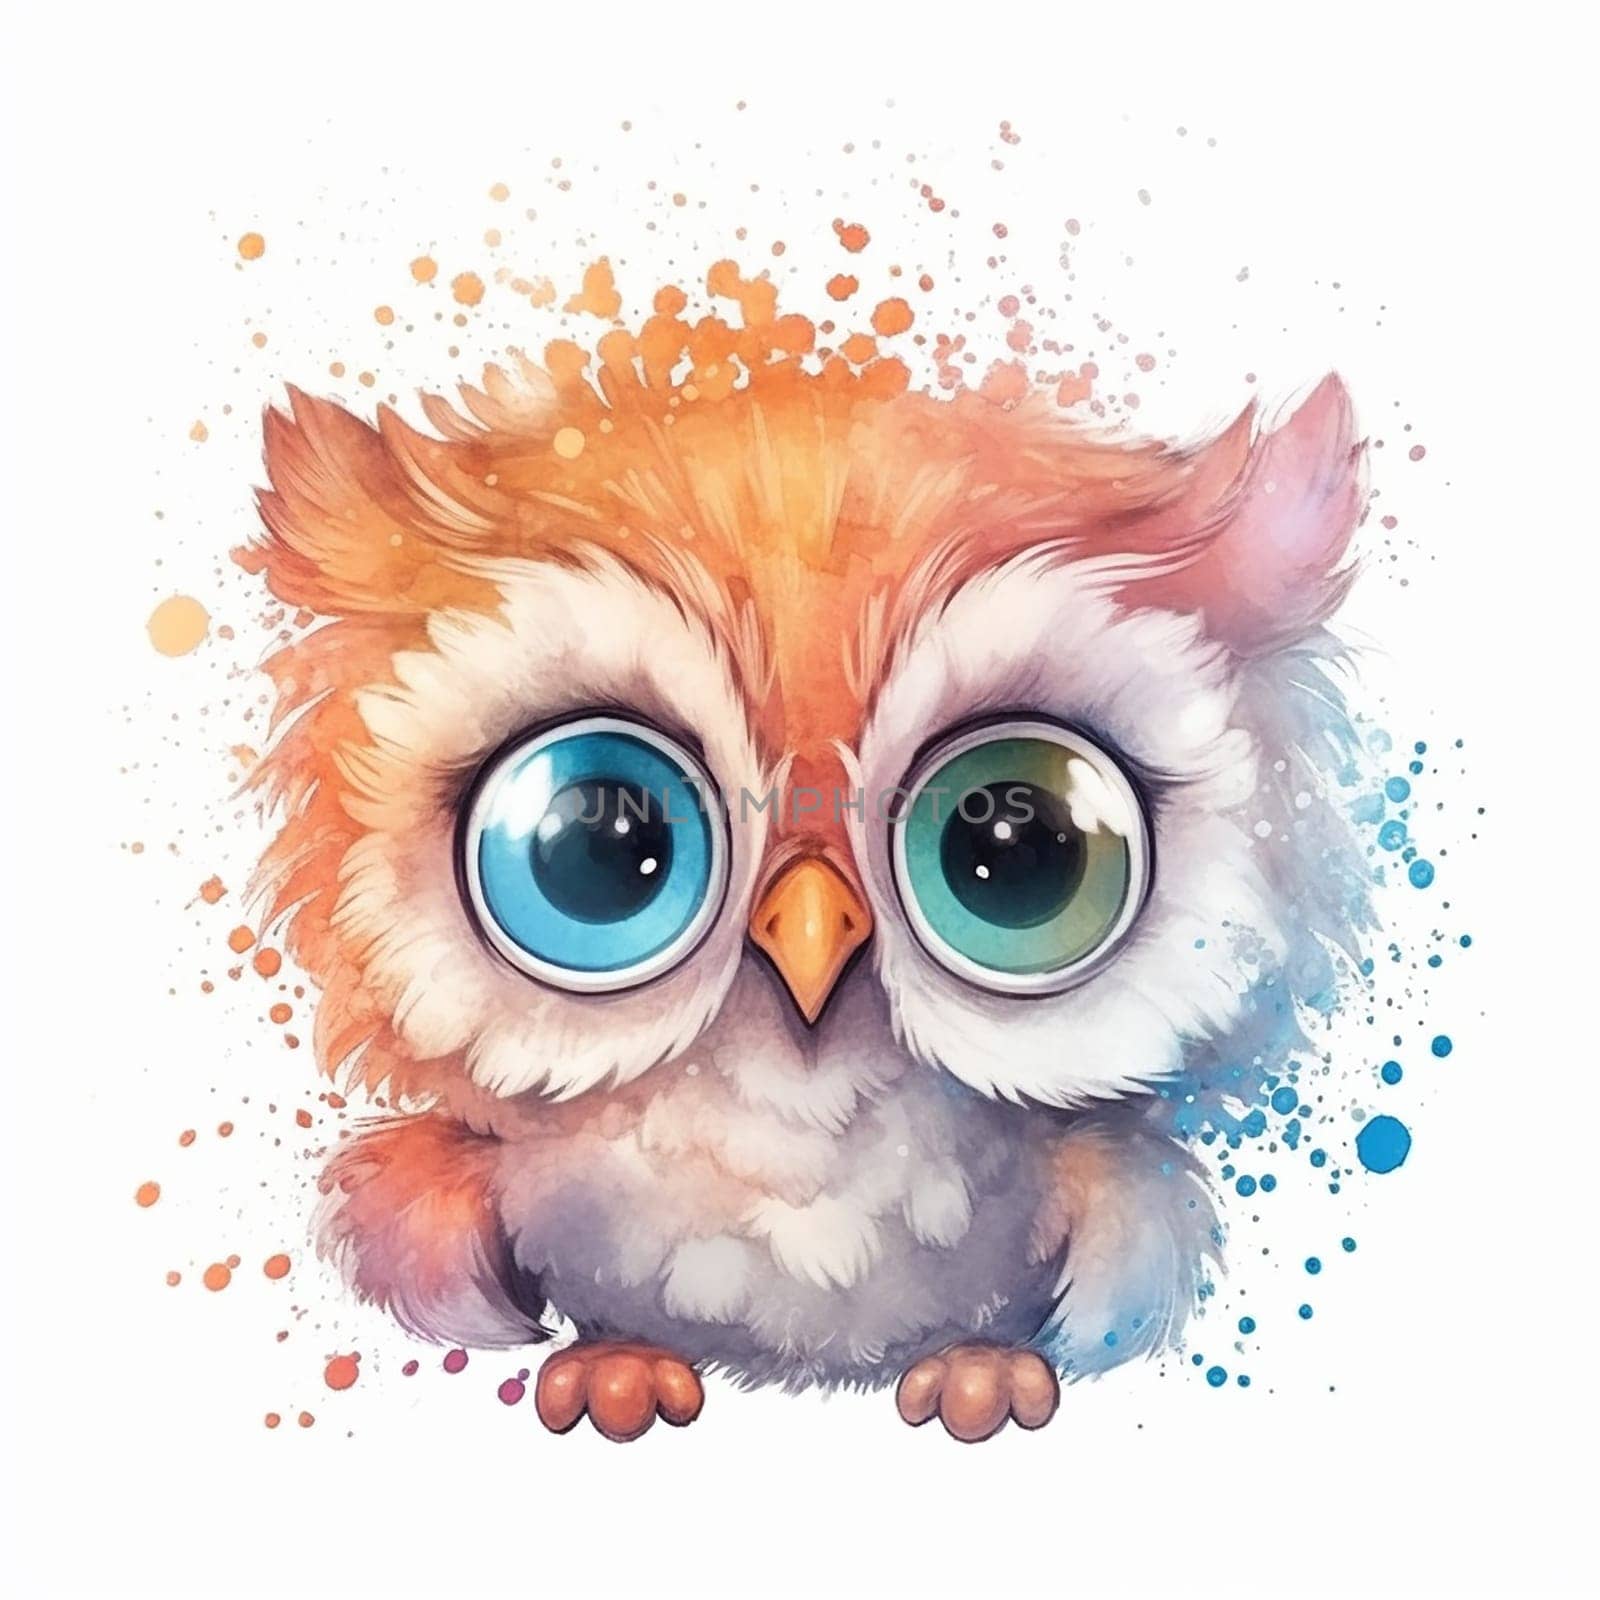 A cute and adorable owl with big eyes, chibi style, cartoon style, white background